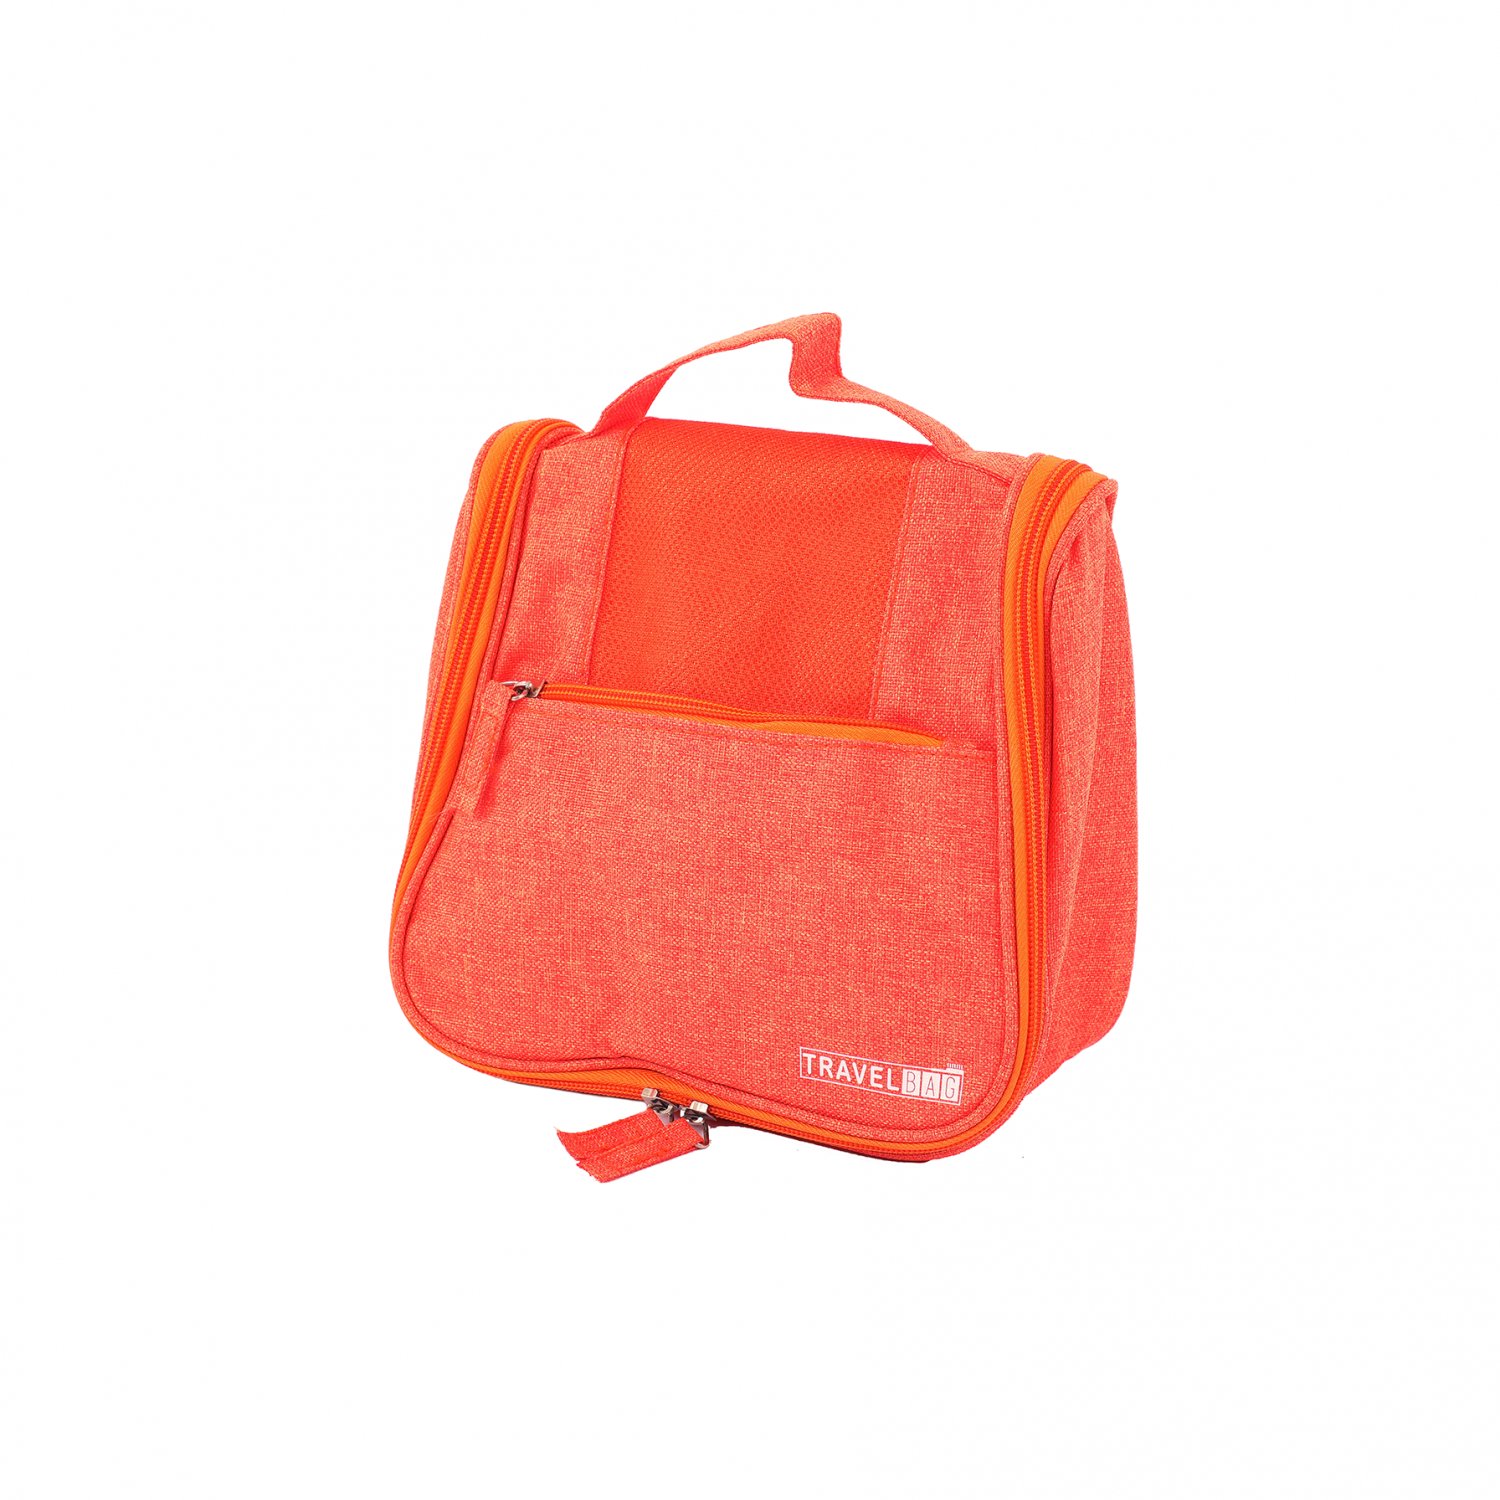 Waterproof Orange Hanging Toiletries Travel Wash Bag with Compartments